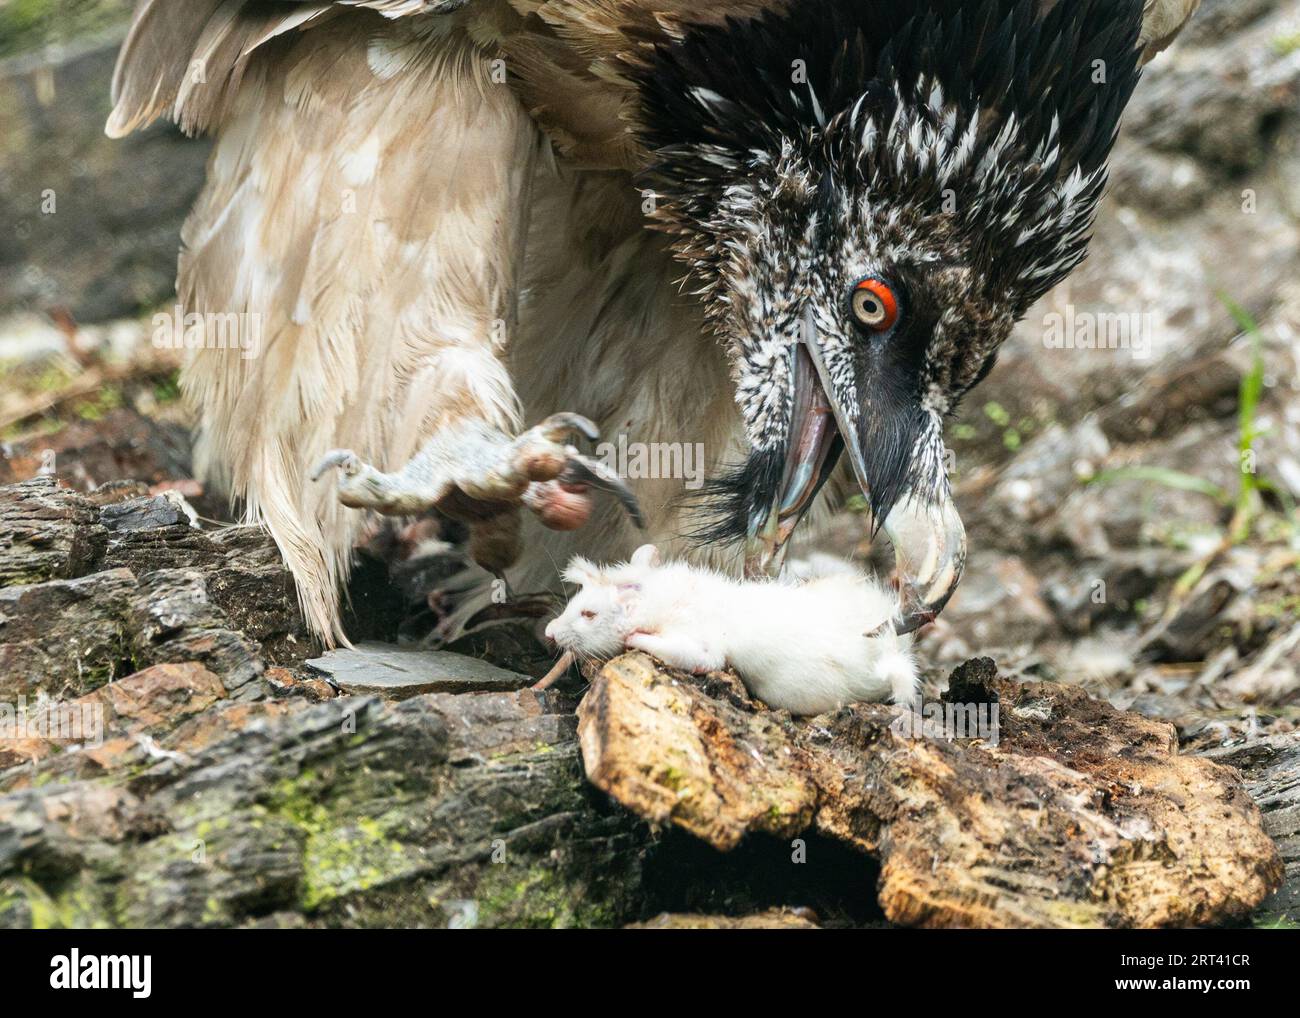 Rare moment captured: Bearded Vulture, Gypaetus barbatus, dining on a mouse in Iran's rugged terrain. A testament to nature's balance. Stock Photo